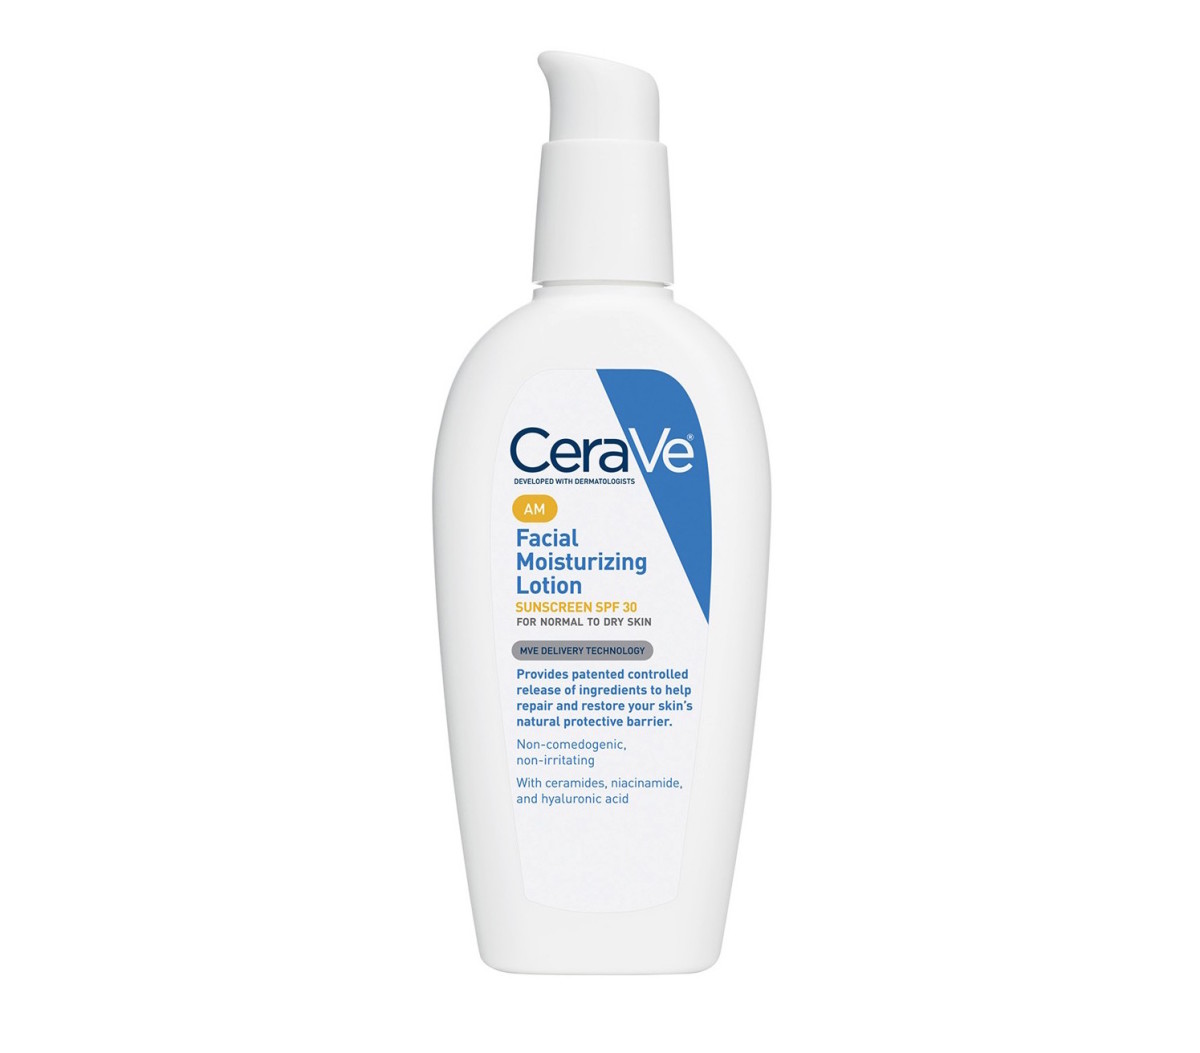 CeraVe AM Facial Moisturizing Lotion SPF 30, $12.99, available at Bed Bath & Beyond